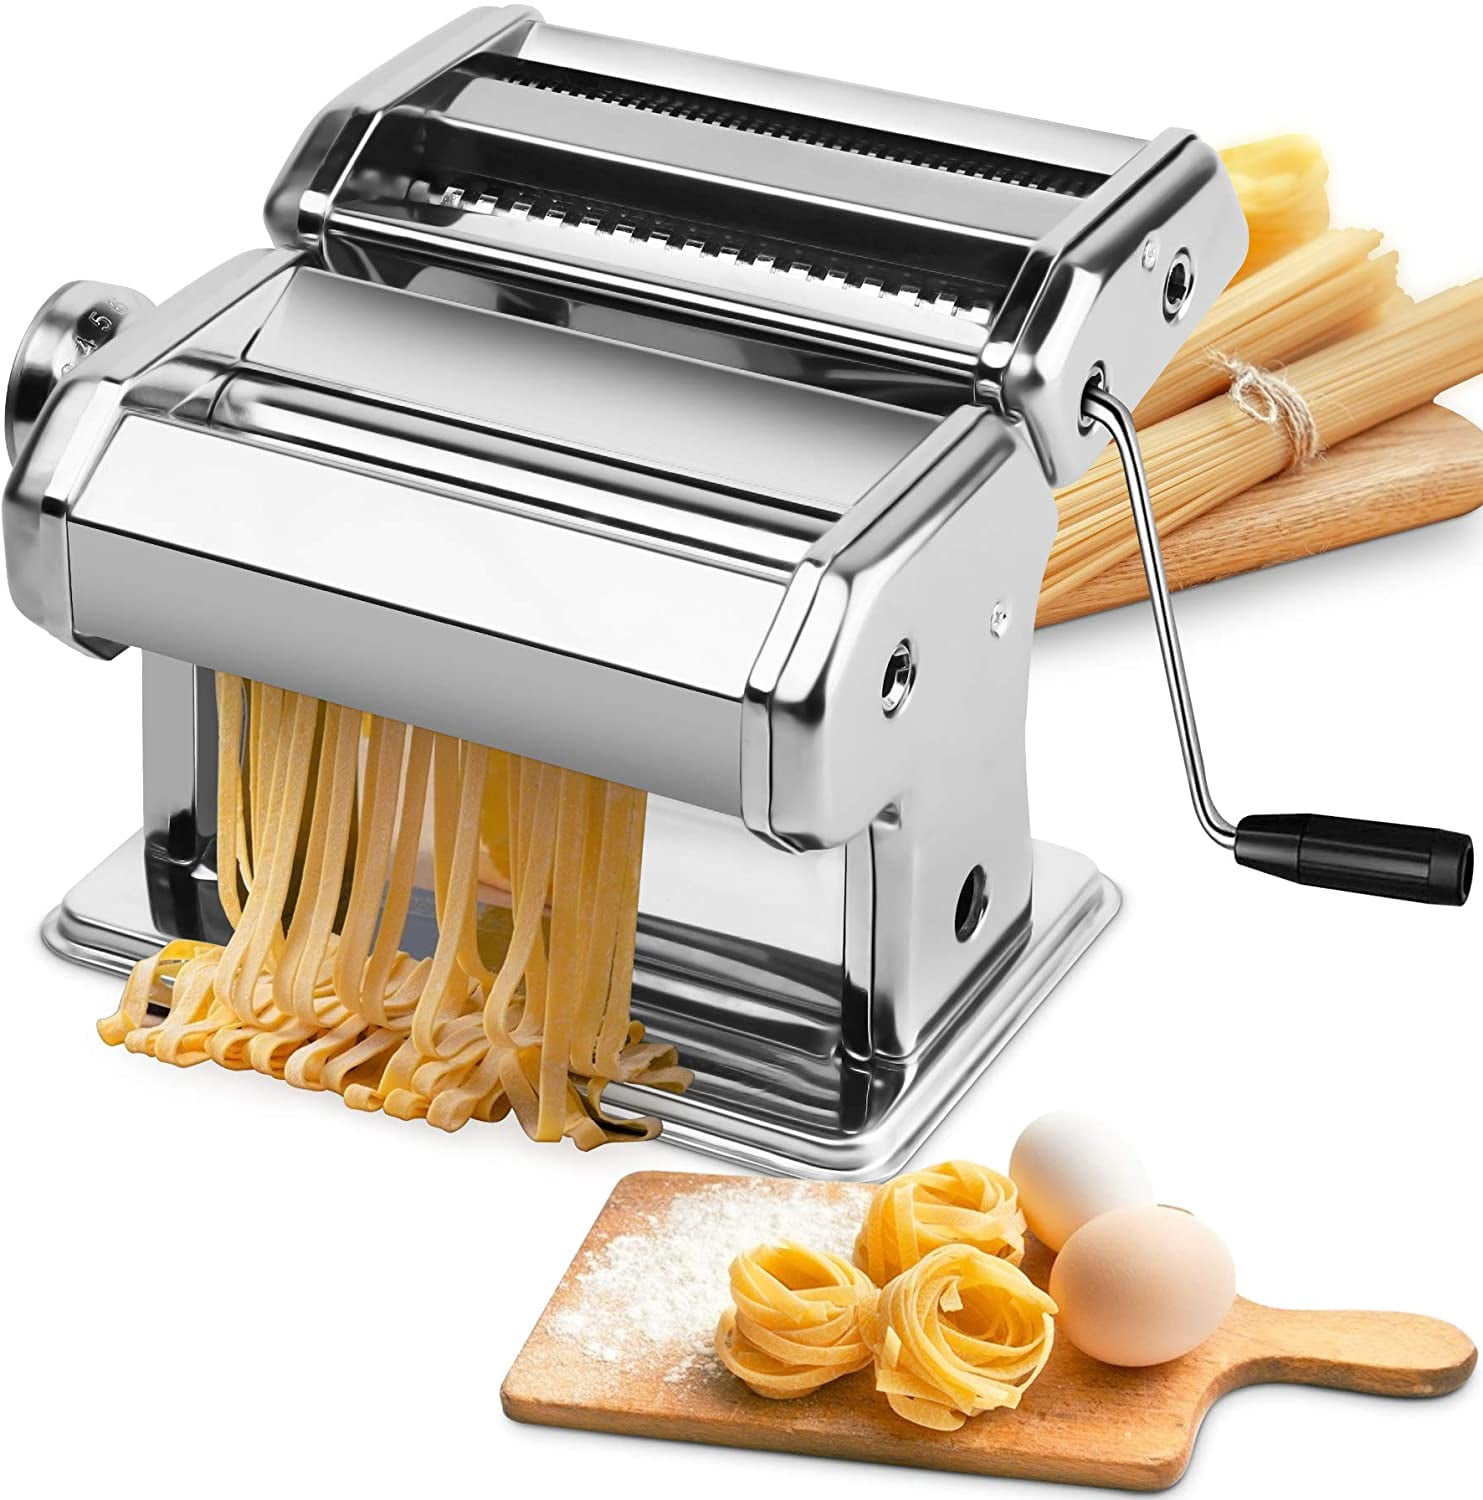 Pasta Machine, FONDRUN Pasta Maker Stainless Steel Manual Pasta Maker  Machine with 8 Adjustable Thickness Settings, 2 Noodle Cutter, Suit for  Homemade